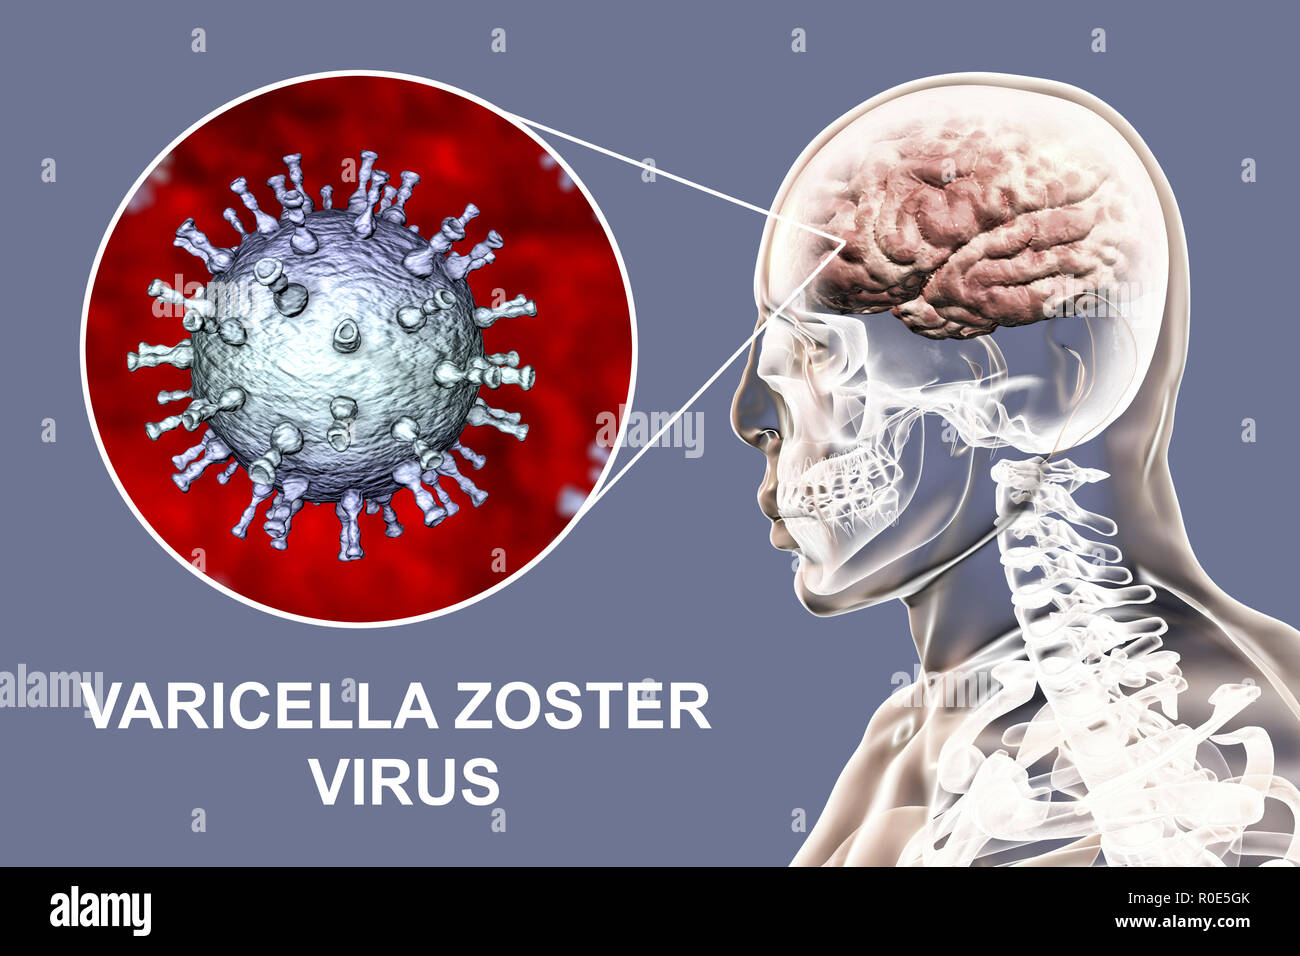 Encephalitis caused by varicella zoster virus (VZV), computer illustration. VZV, a virus from the Herpesviridae family, is the causative agent of chickenpox and shingles. Encephalitis (inflammation of the brain) is one of complications of chickenpox infection. Stock Photo